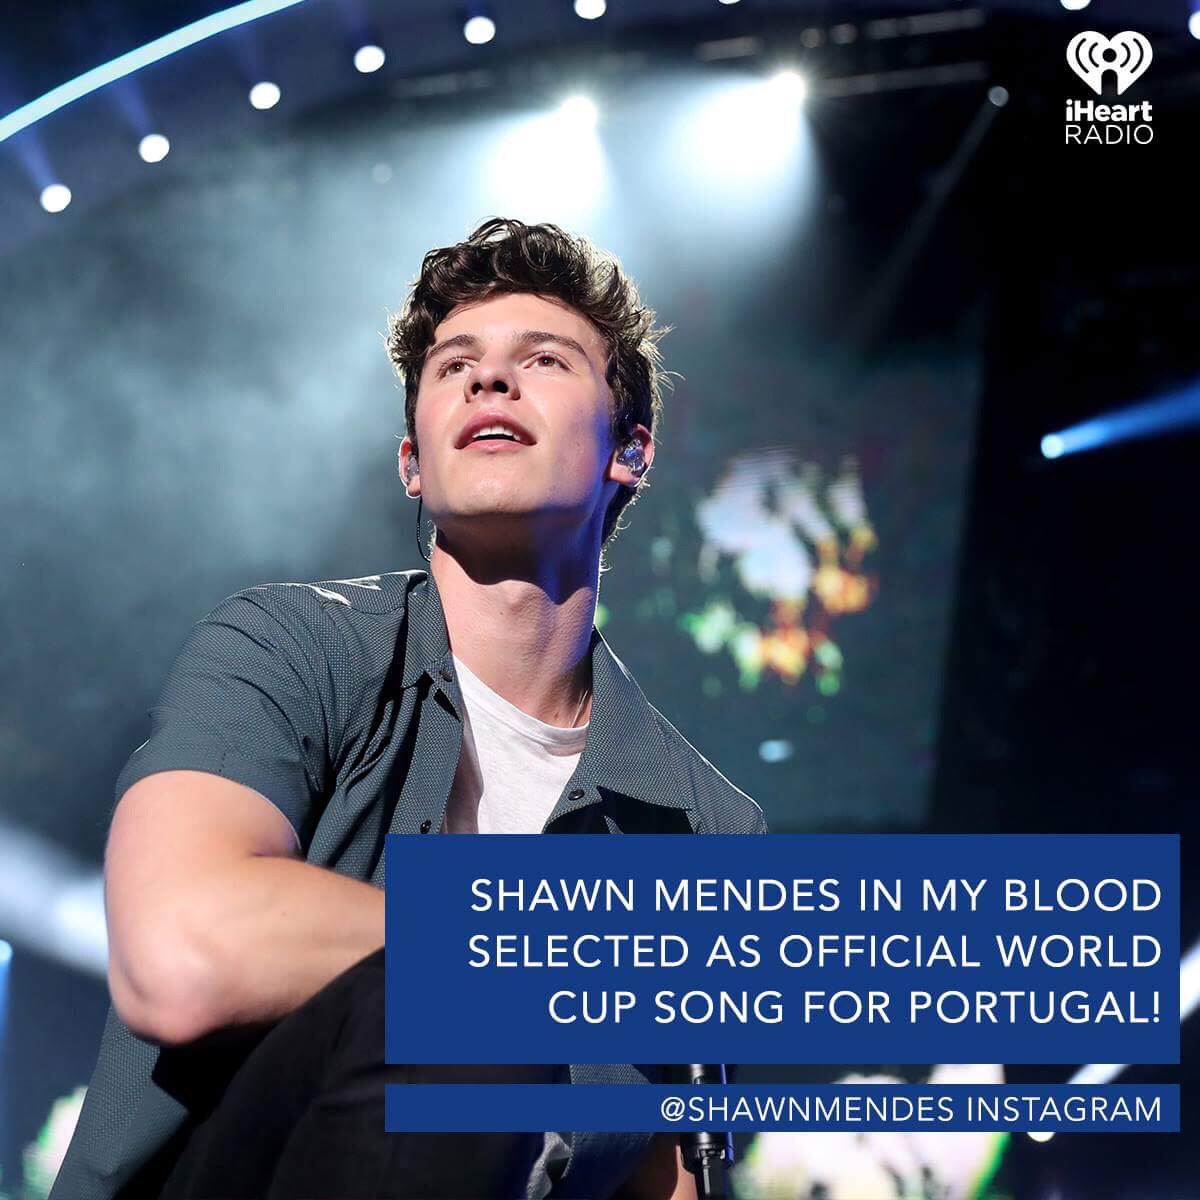 ⚽️ @shawnmendes In My Blood is now the Official World Cup song for @selecaoportugal 🌍 #InMyBloodPortugal https://t.co/AzoXthFI9d